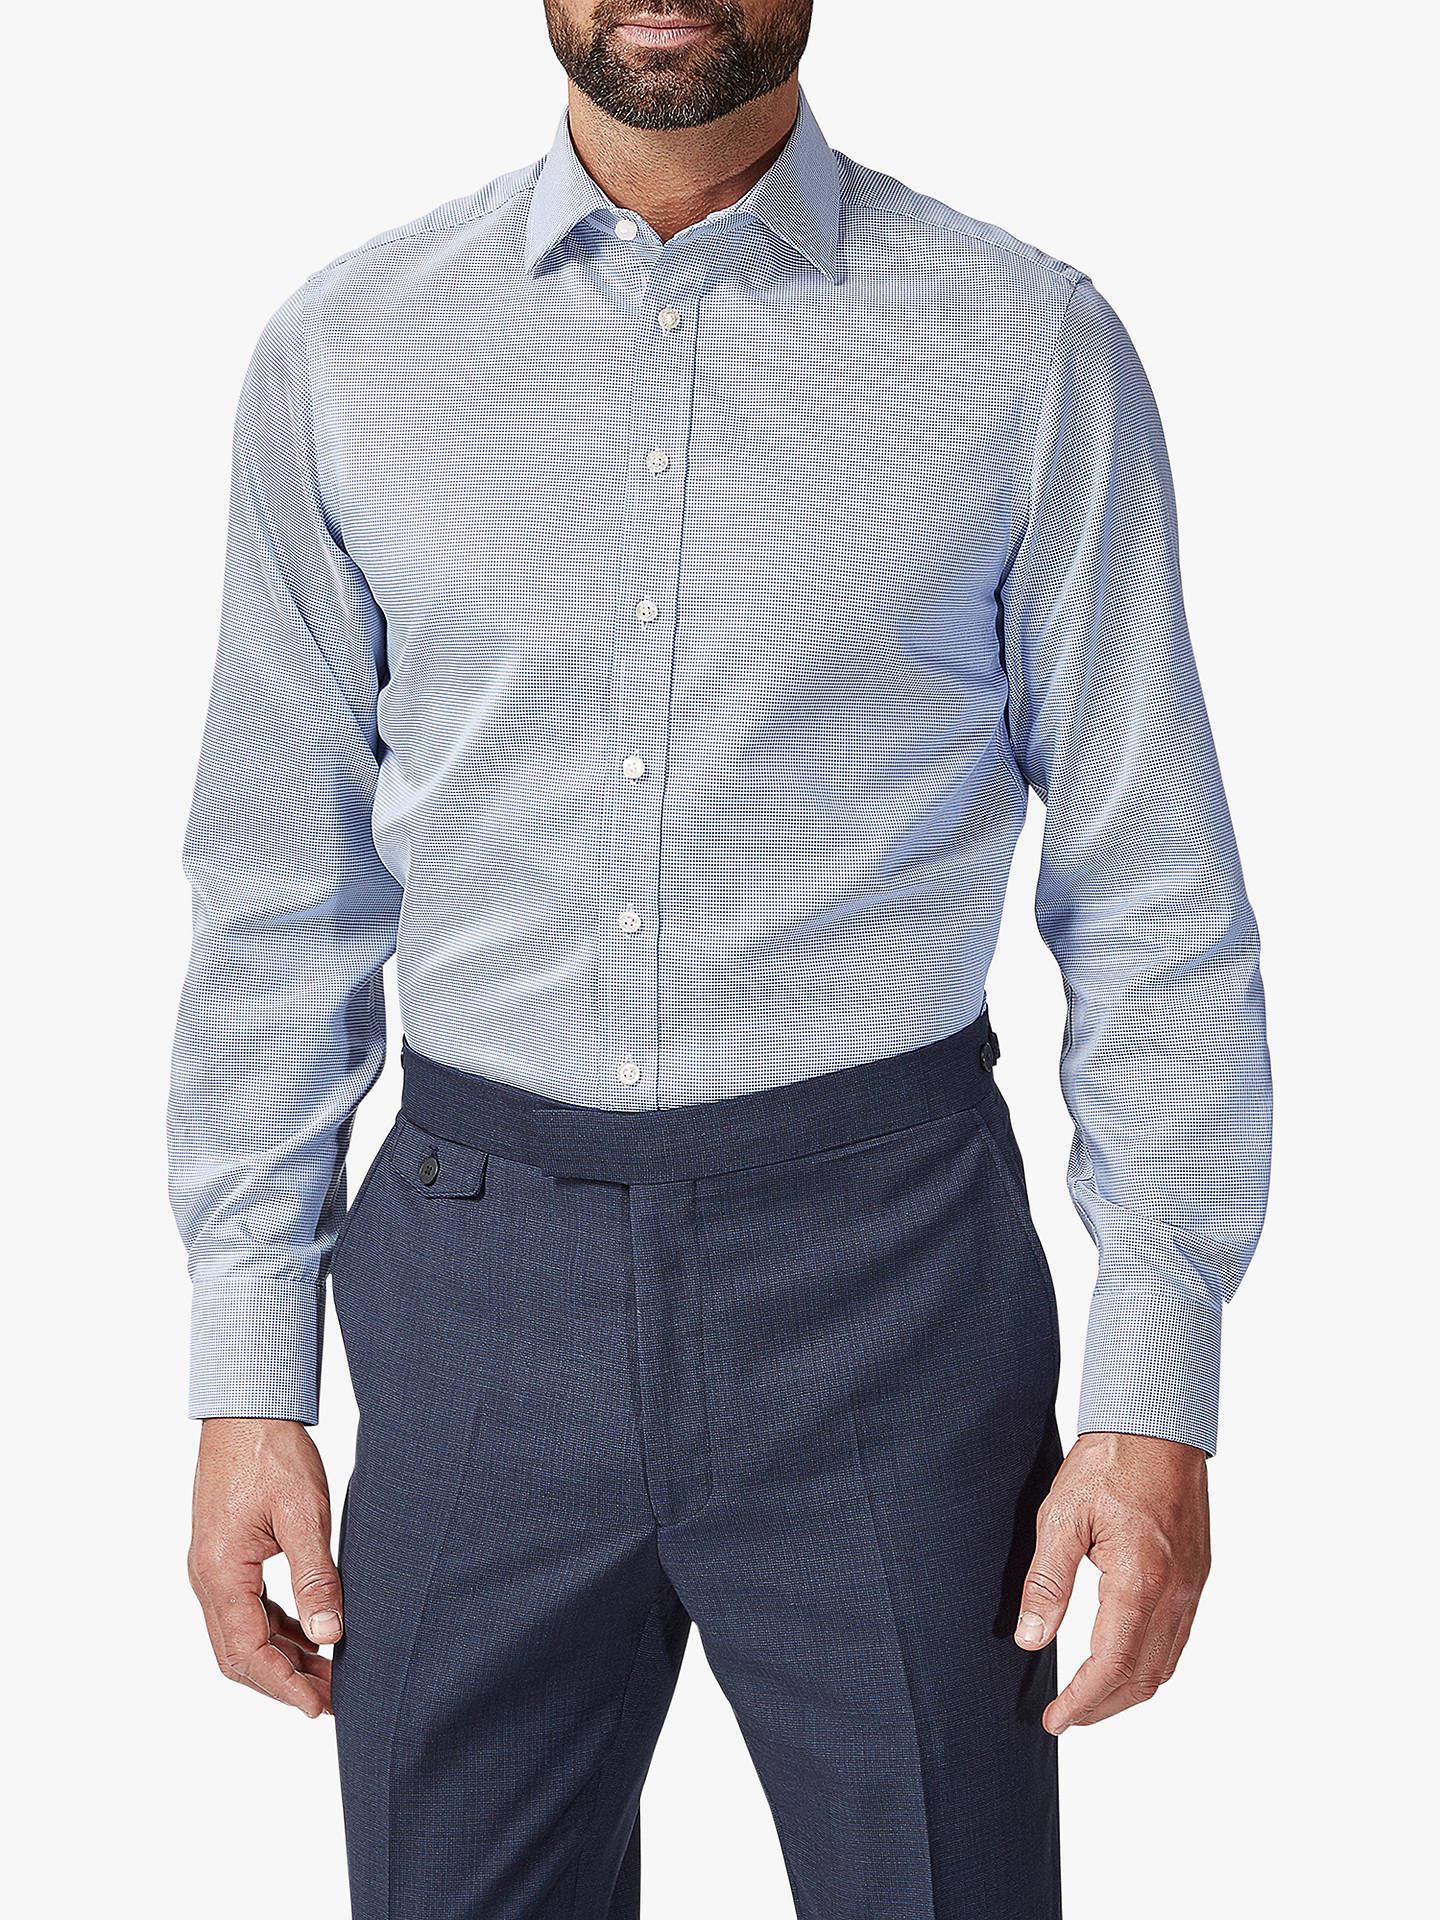 Chester by Chester Barrie Puppytooth Shirt, Blue at John Lewis & Partners